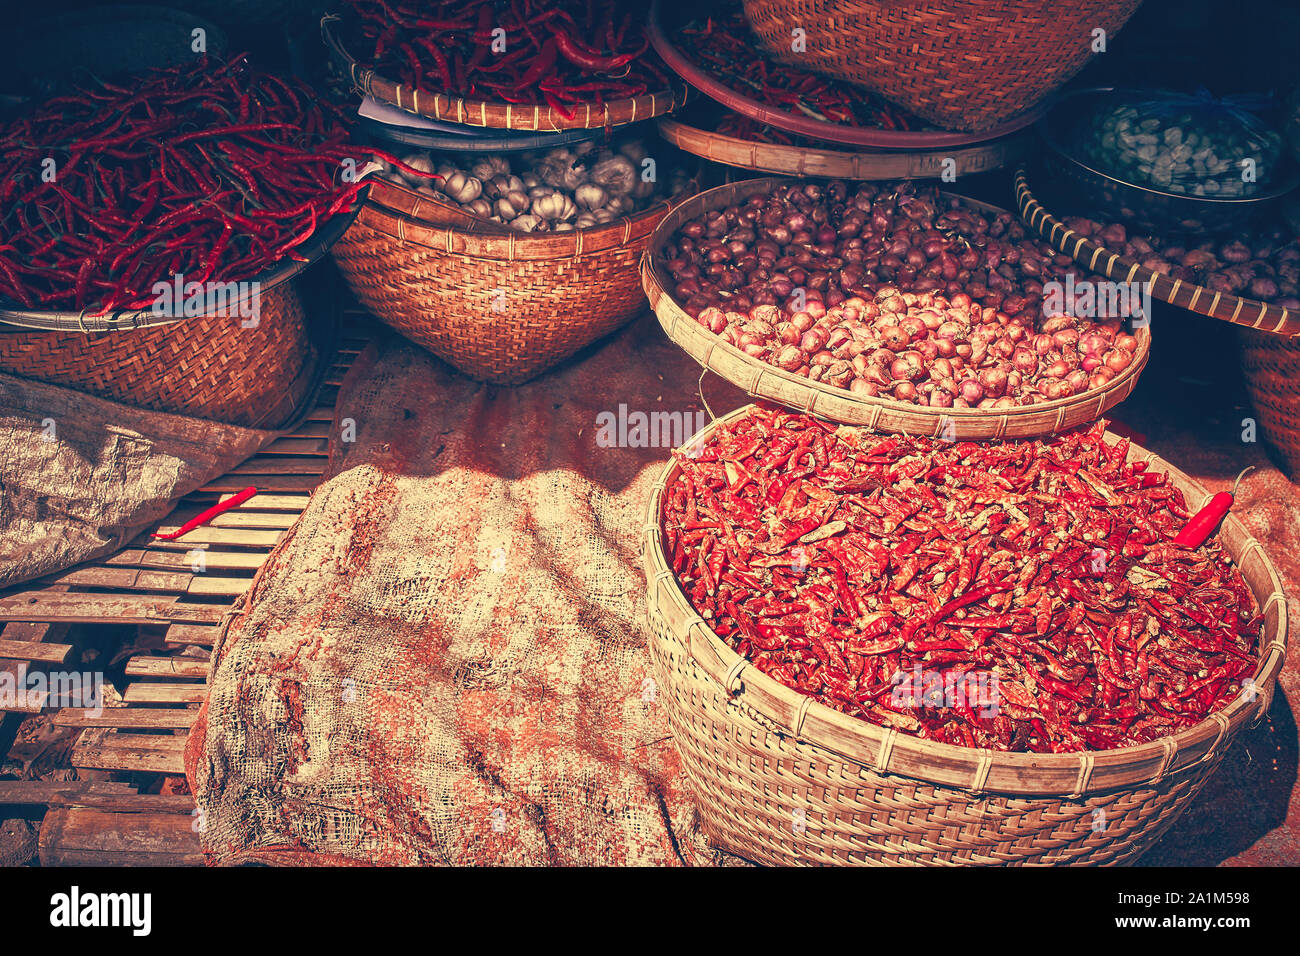 Moody image of colored spices at local market. Place for your text. Stock Photo